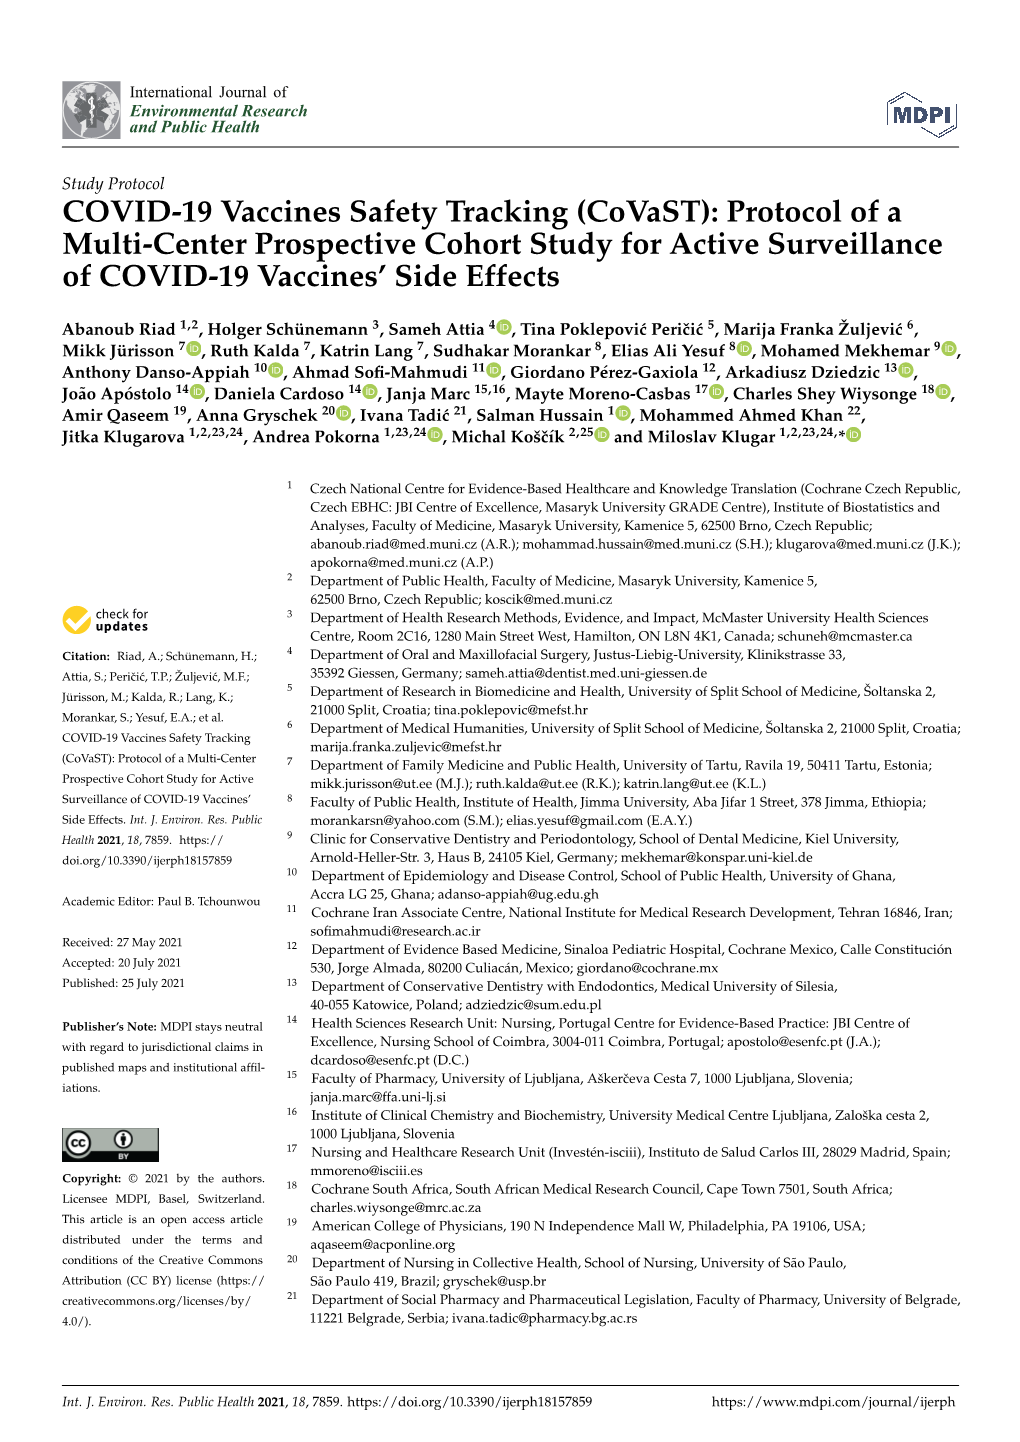 COVID-19 Vaccines Safety Tracking (Covast): Protocol of a Multi-Center Prospective Cohort Study for Active Surveillance of COVID-19 Vaccines’ Side Effects